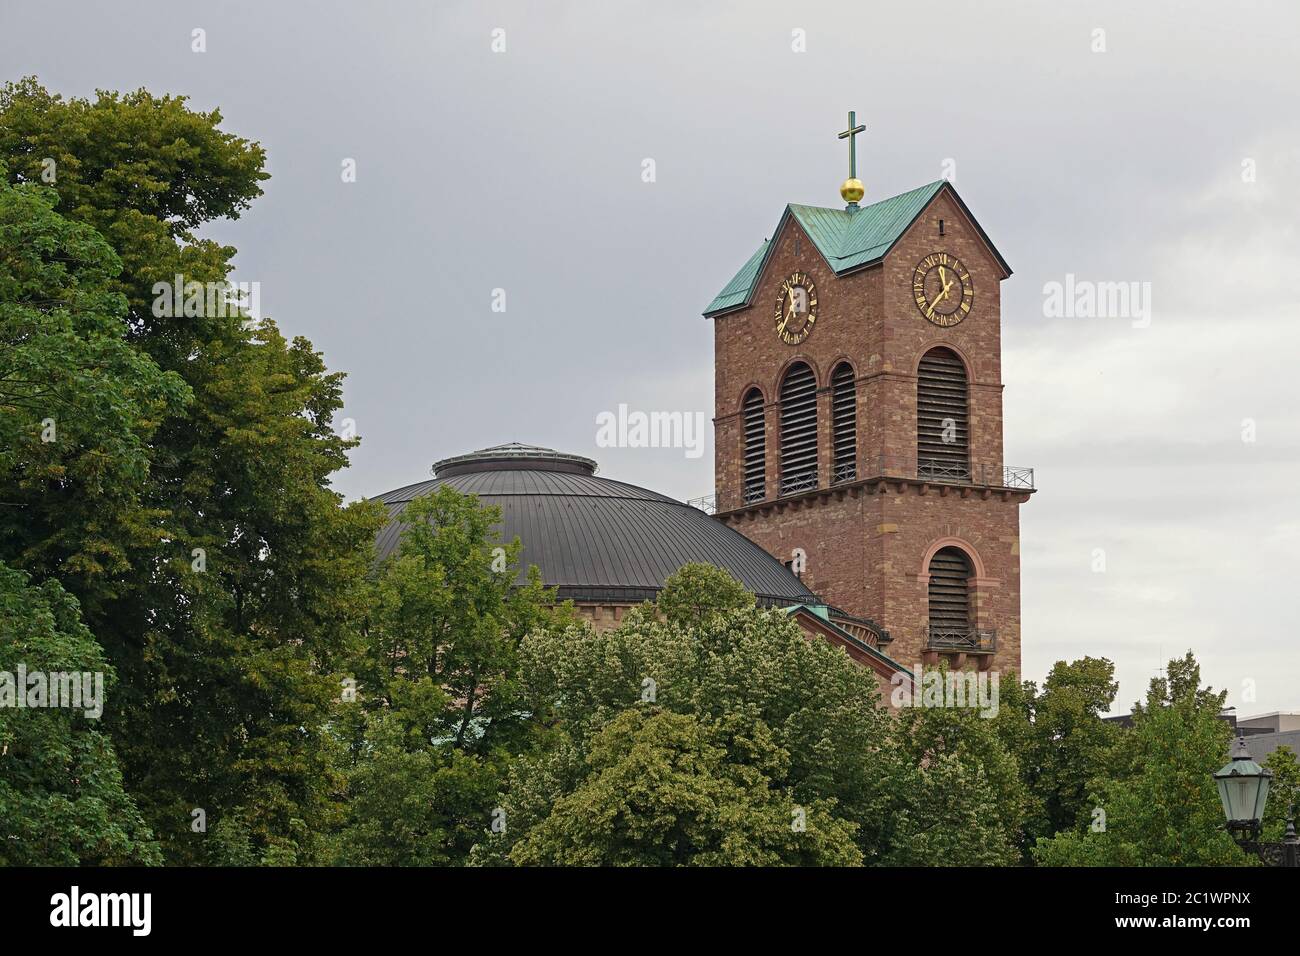 St. Stephen's church tower in Karlsruhe Stock Photo